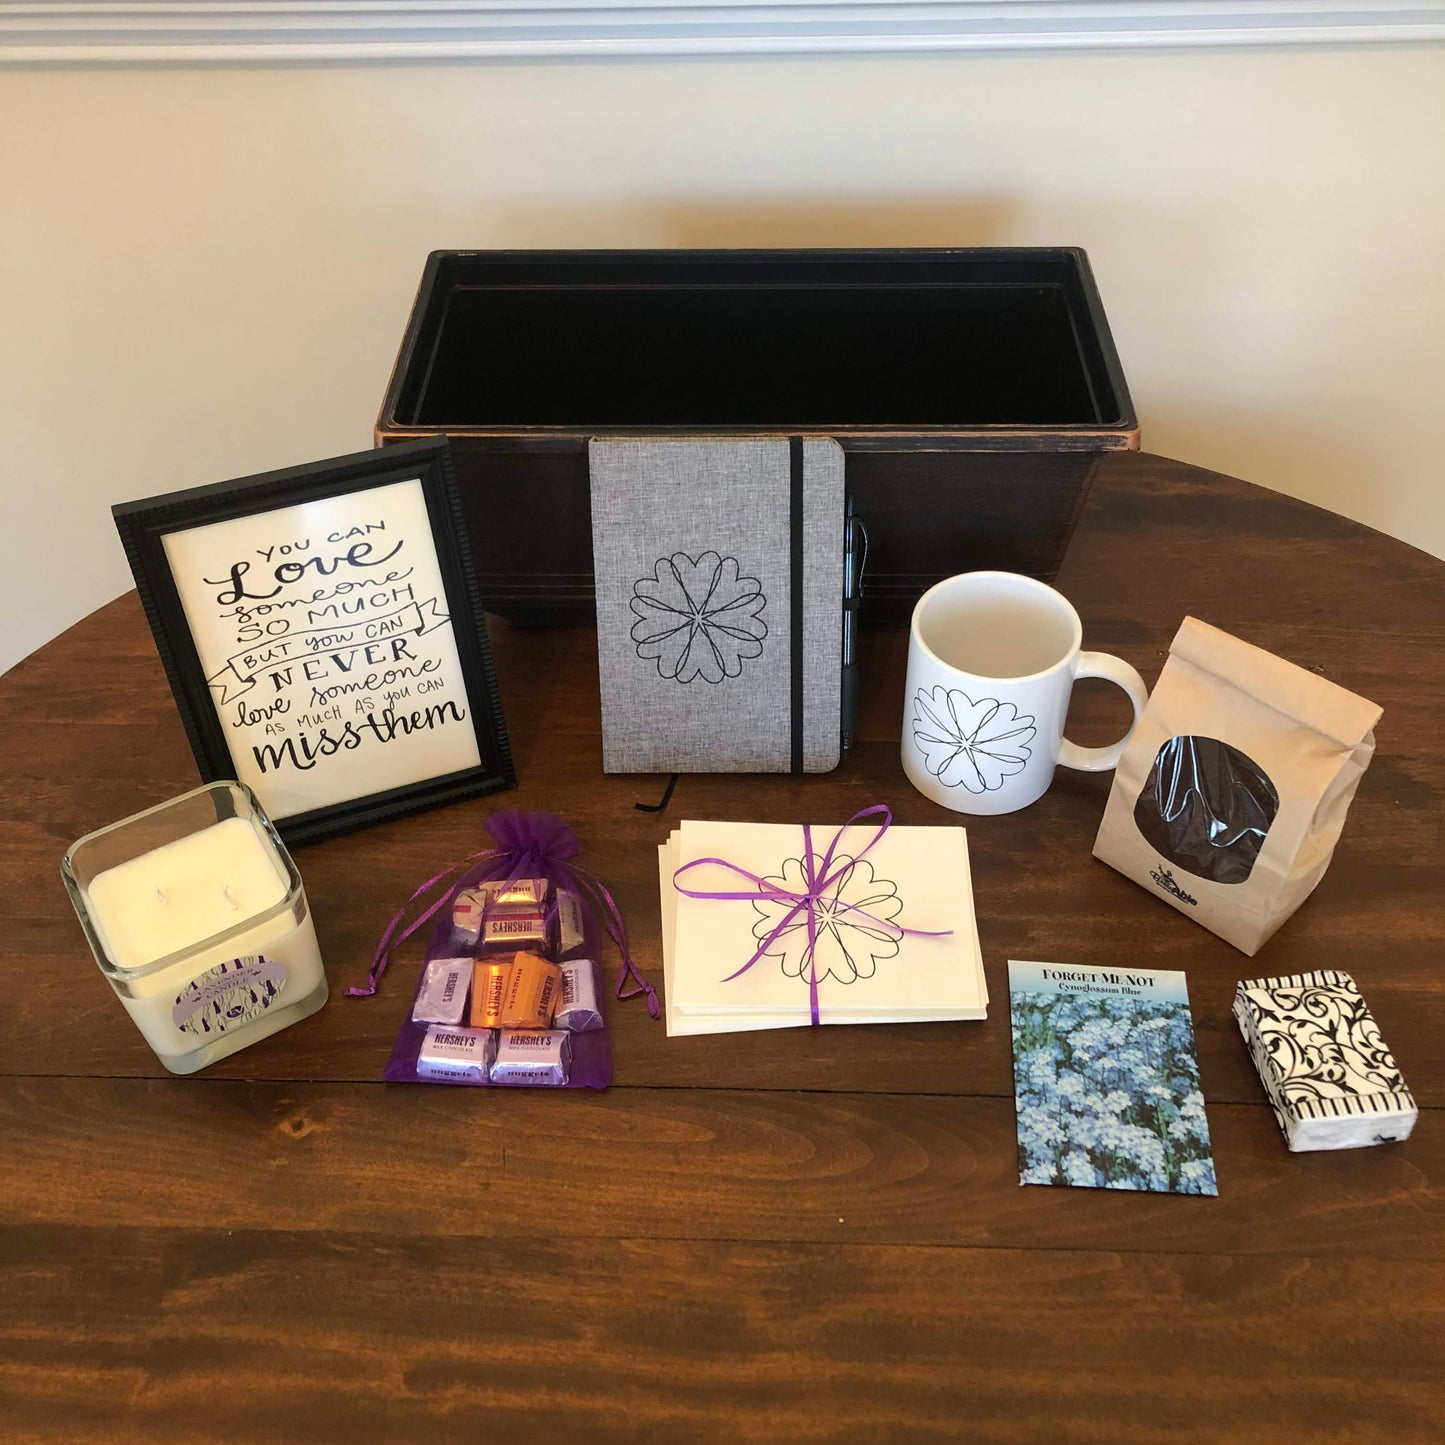 This condolence gift basket with upgraded wood planter includes a double wick lavender candle, handmade heart wreath notecards, gourmet coffee,  chocolate, ceramic mug, framed inspirational calligraphy, fabric covered journal, tissues and a forget me-not-seed packet